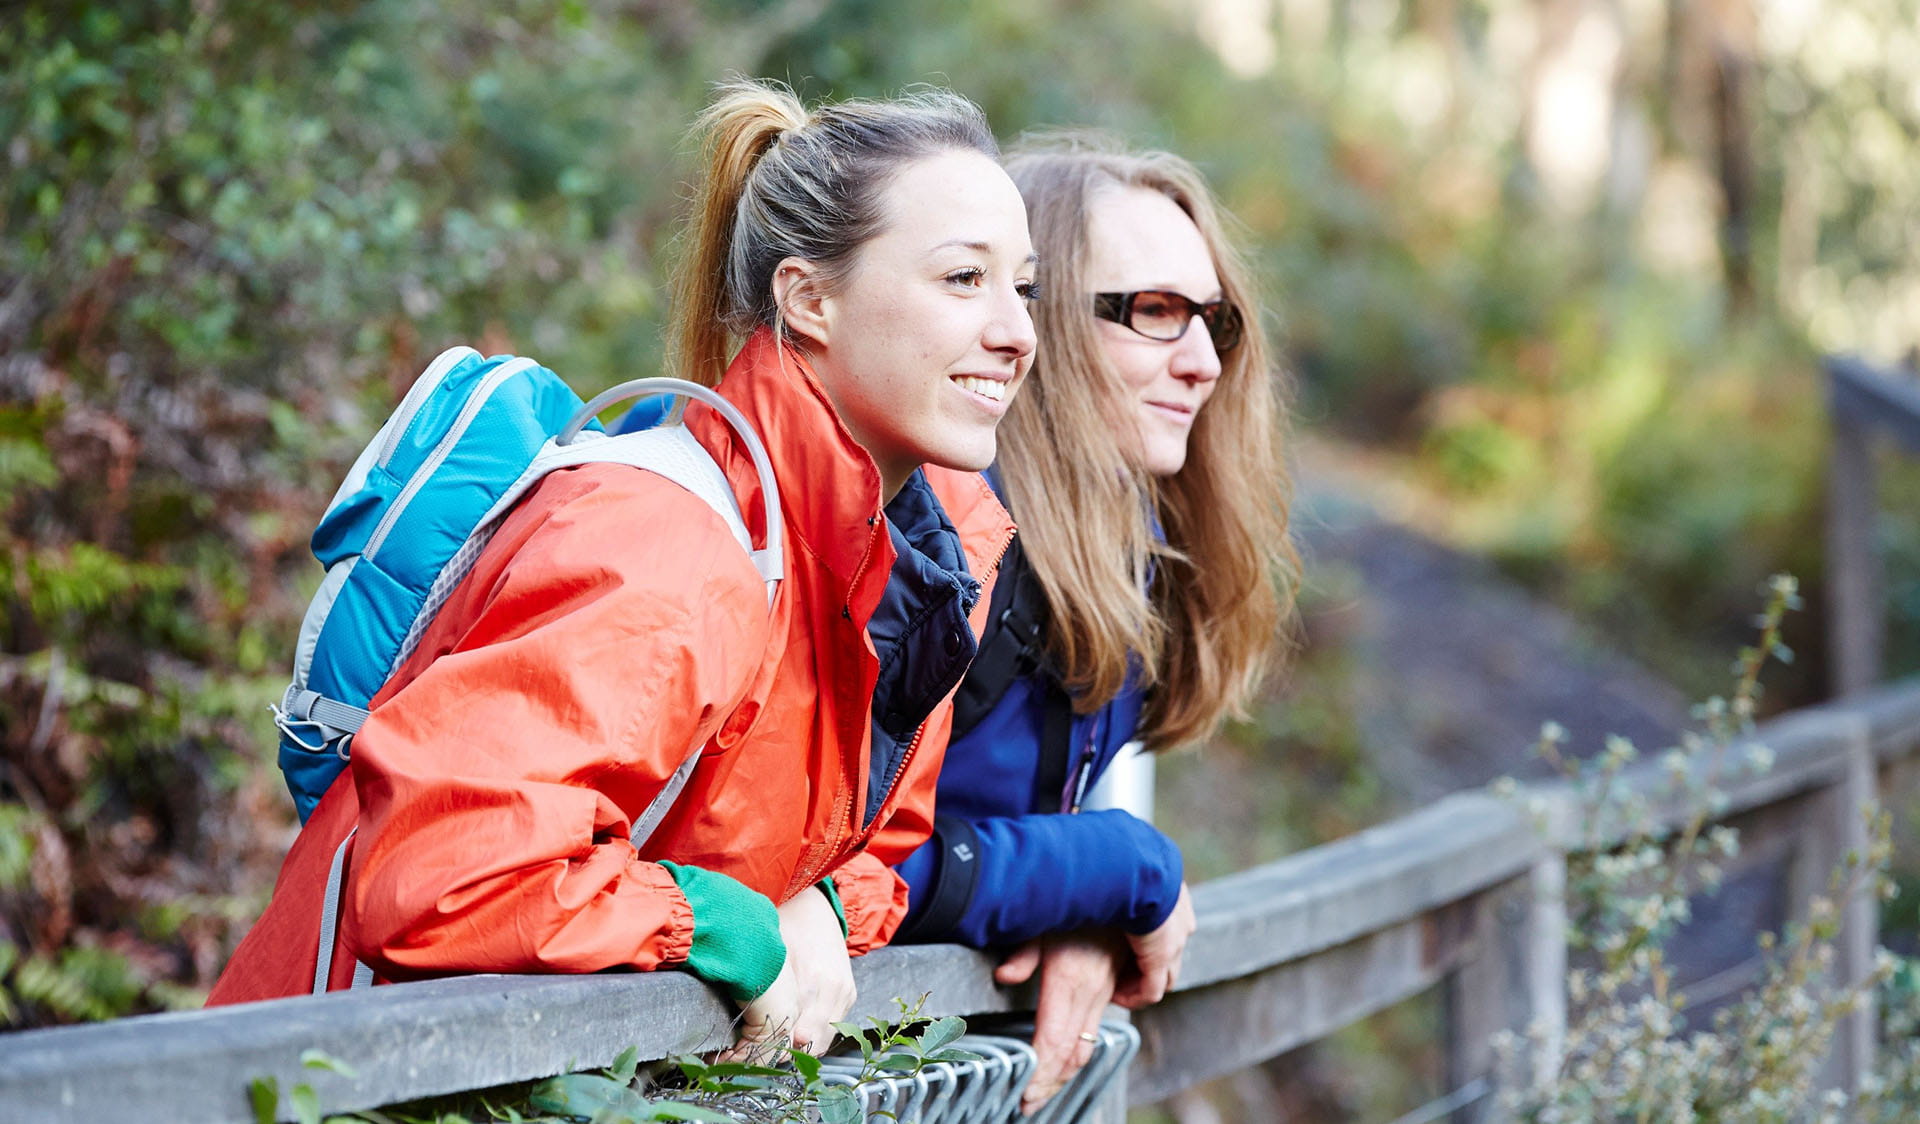 Two women in colourful rain jackets smiling as they lean against and look out over a wooden safety barrier